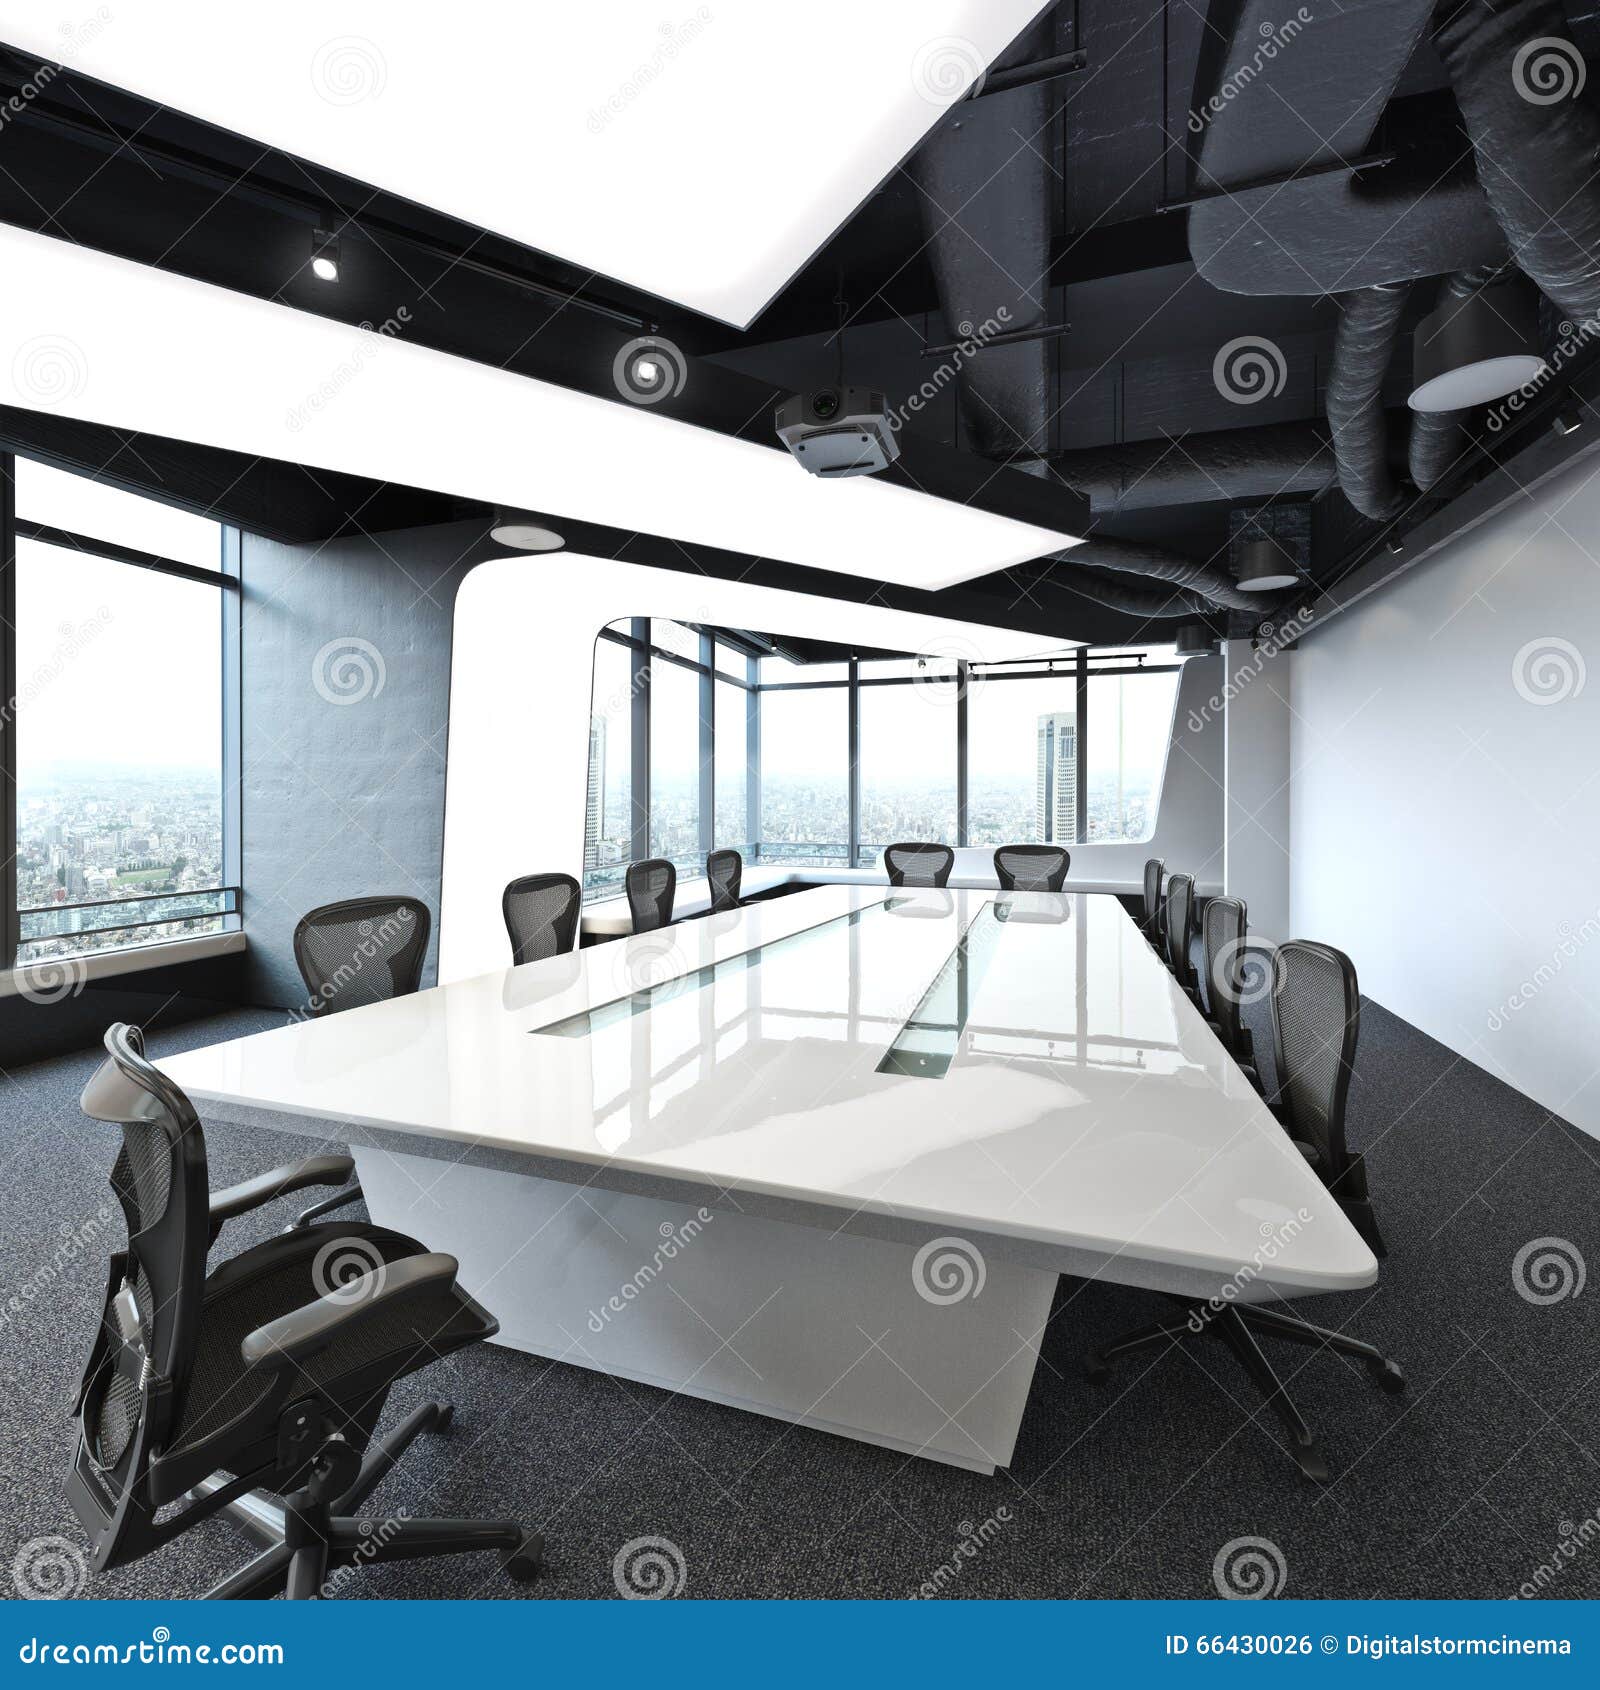 executive high rise modern empty business office conference room overlooking a city.